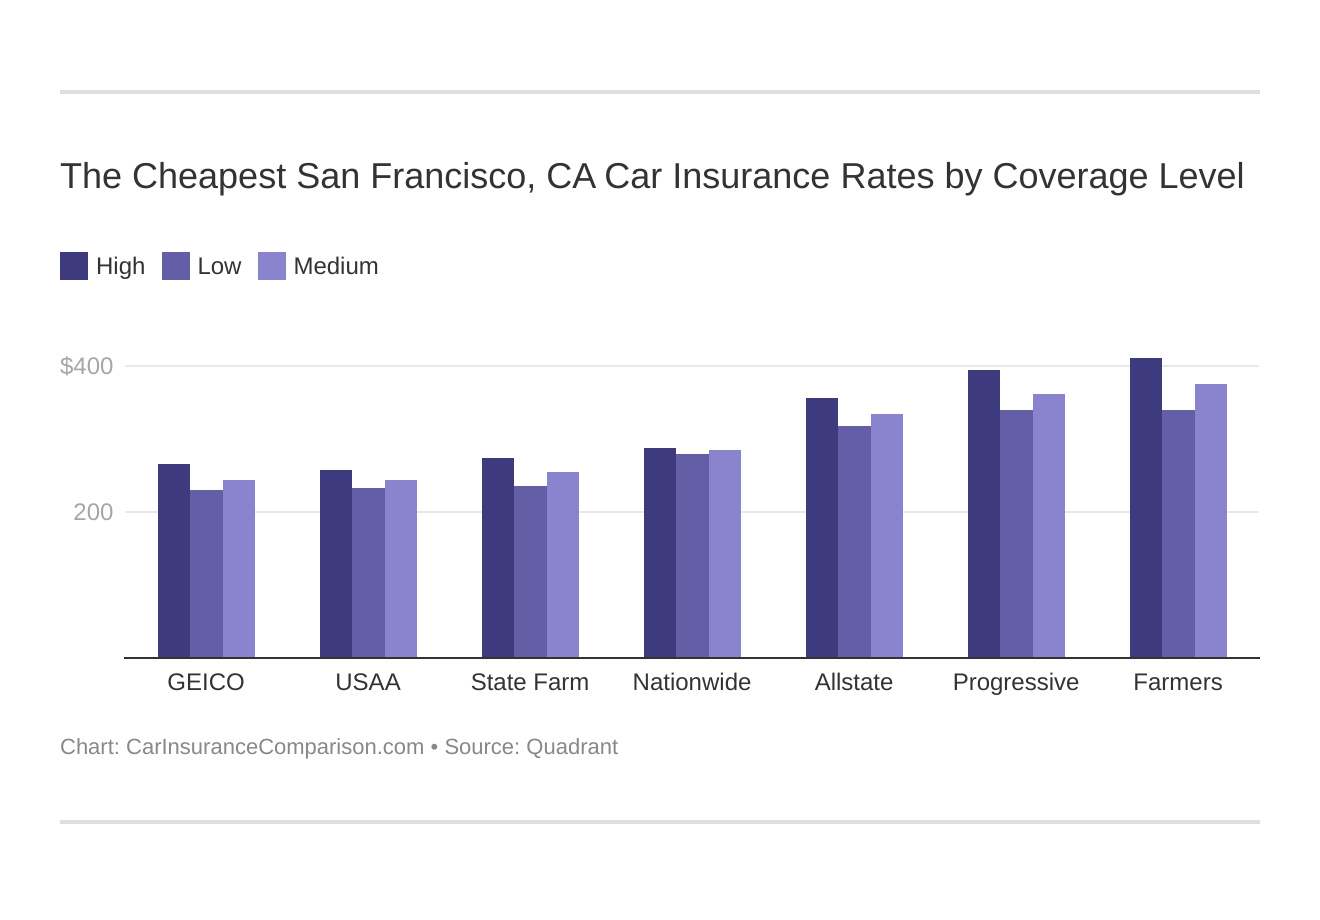 The Cheapest San Francisco, CA Car Insurance Rates by Coverage Level